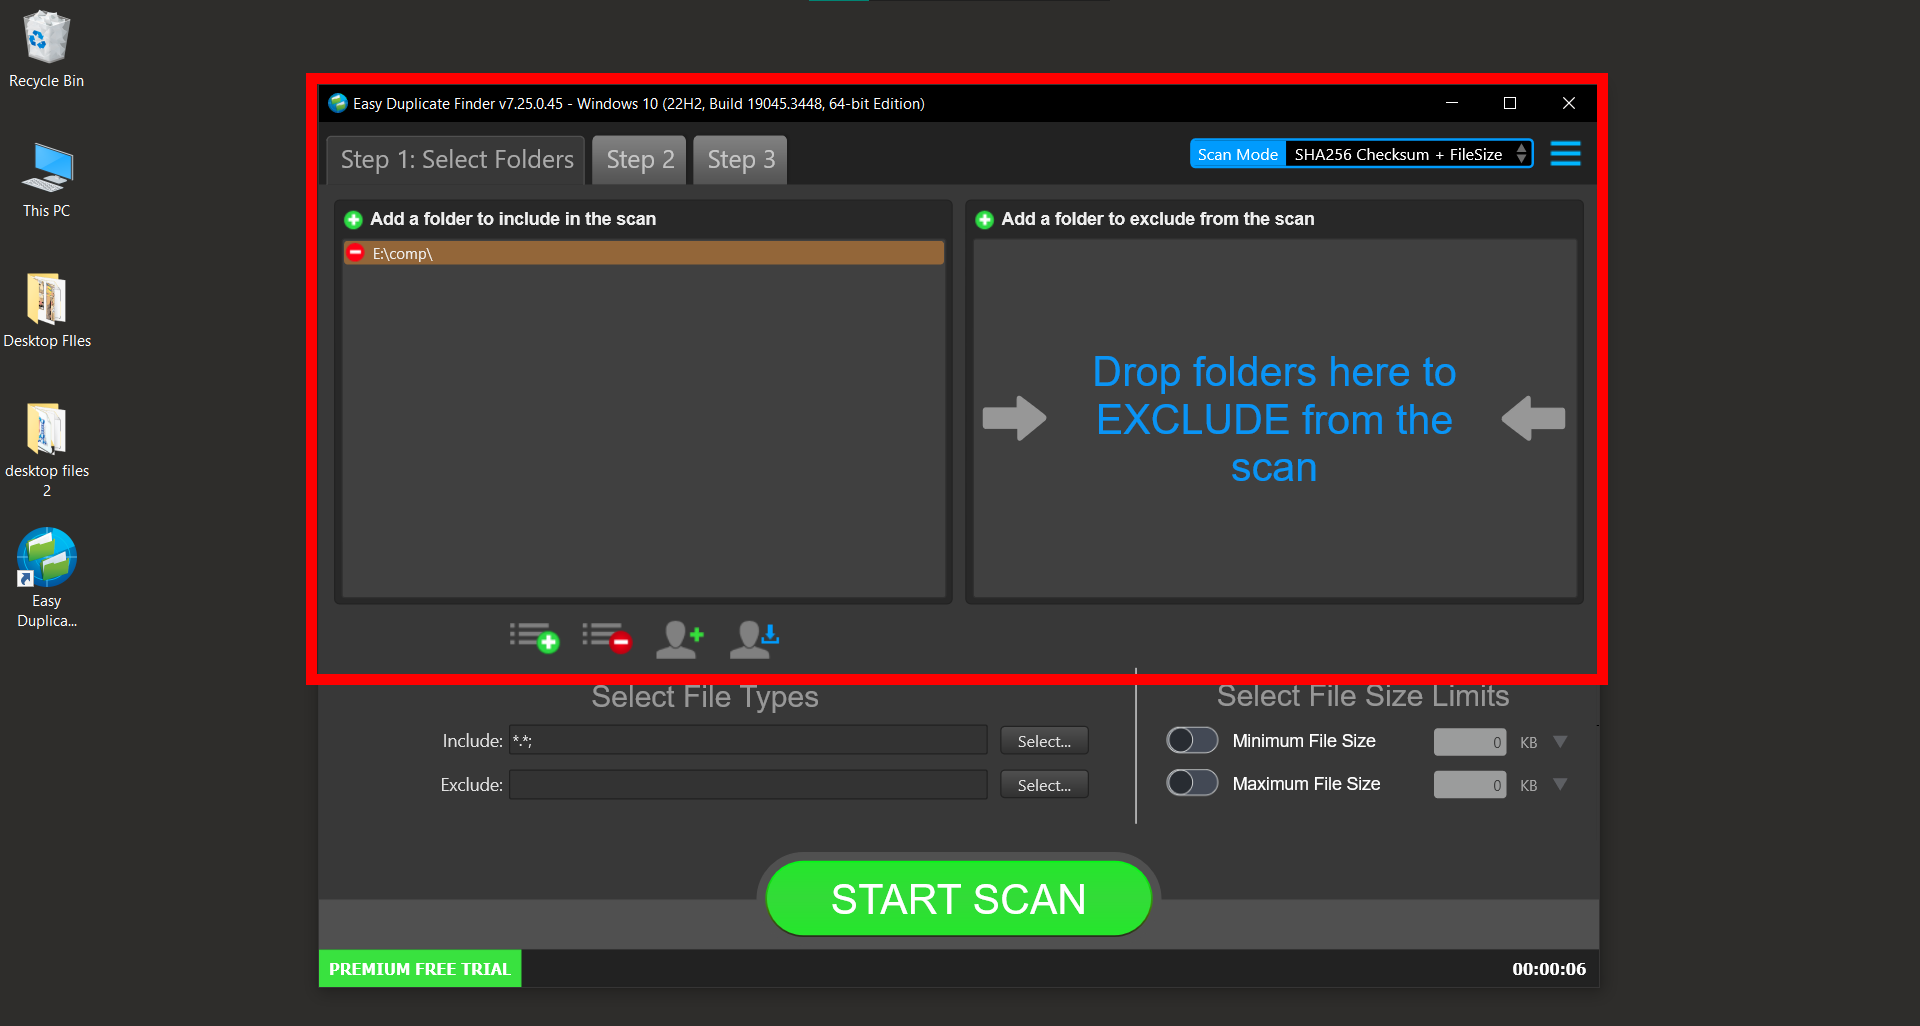 How To Use Easy Duplicate Finder to Remove Duplicate Files: Step 5